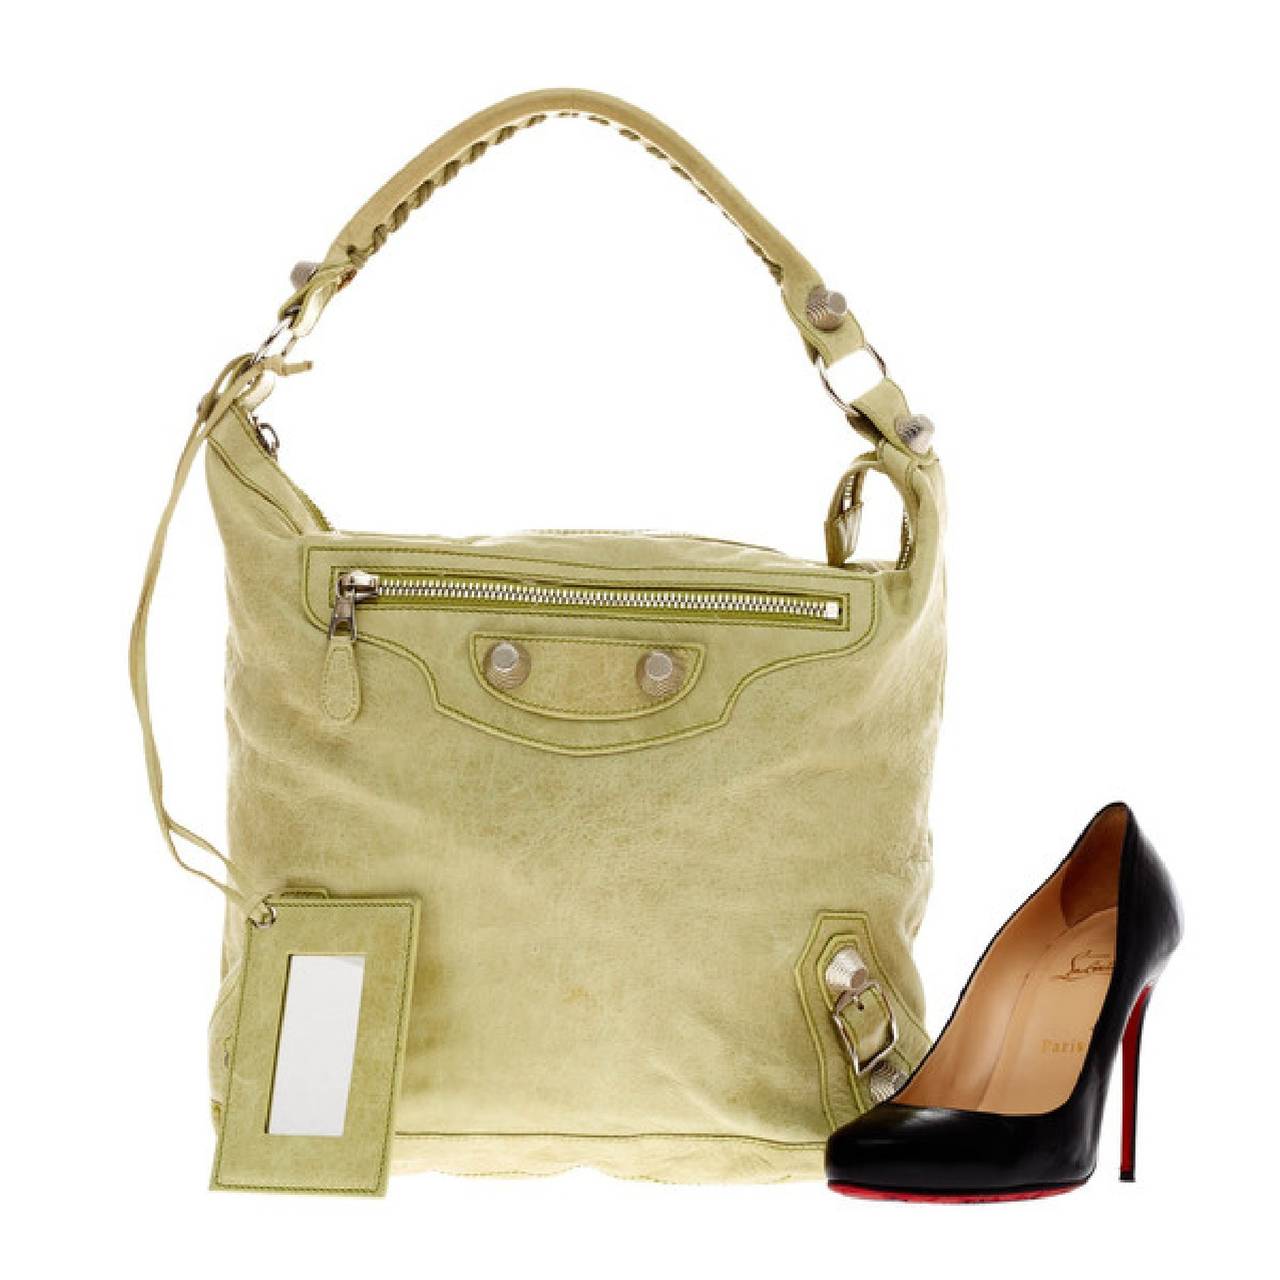 This authentic Balenciaga Day Giant Studs in soft supple apple-green distressed leather is a go-to essential that fits everyday essentials. This spacious hobo is accented with an intertwined braided leather top handle, giant silver hardware and stud